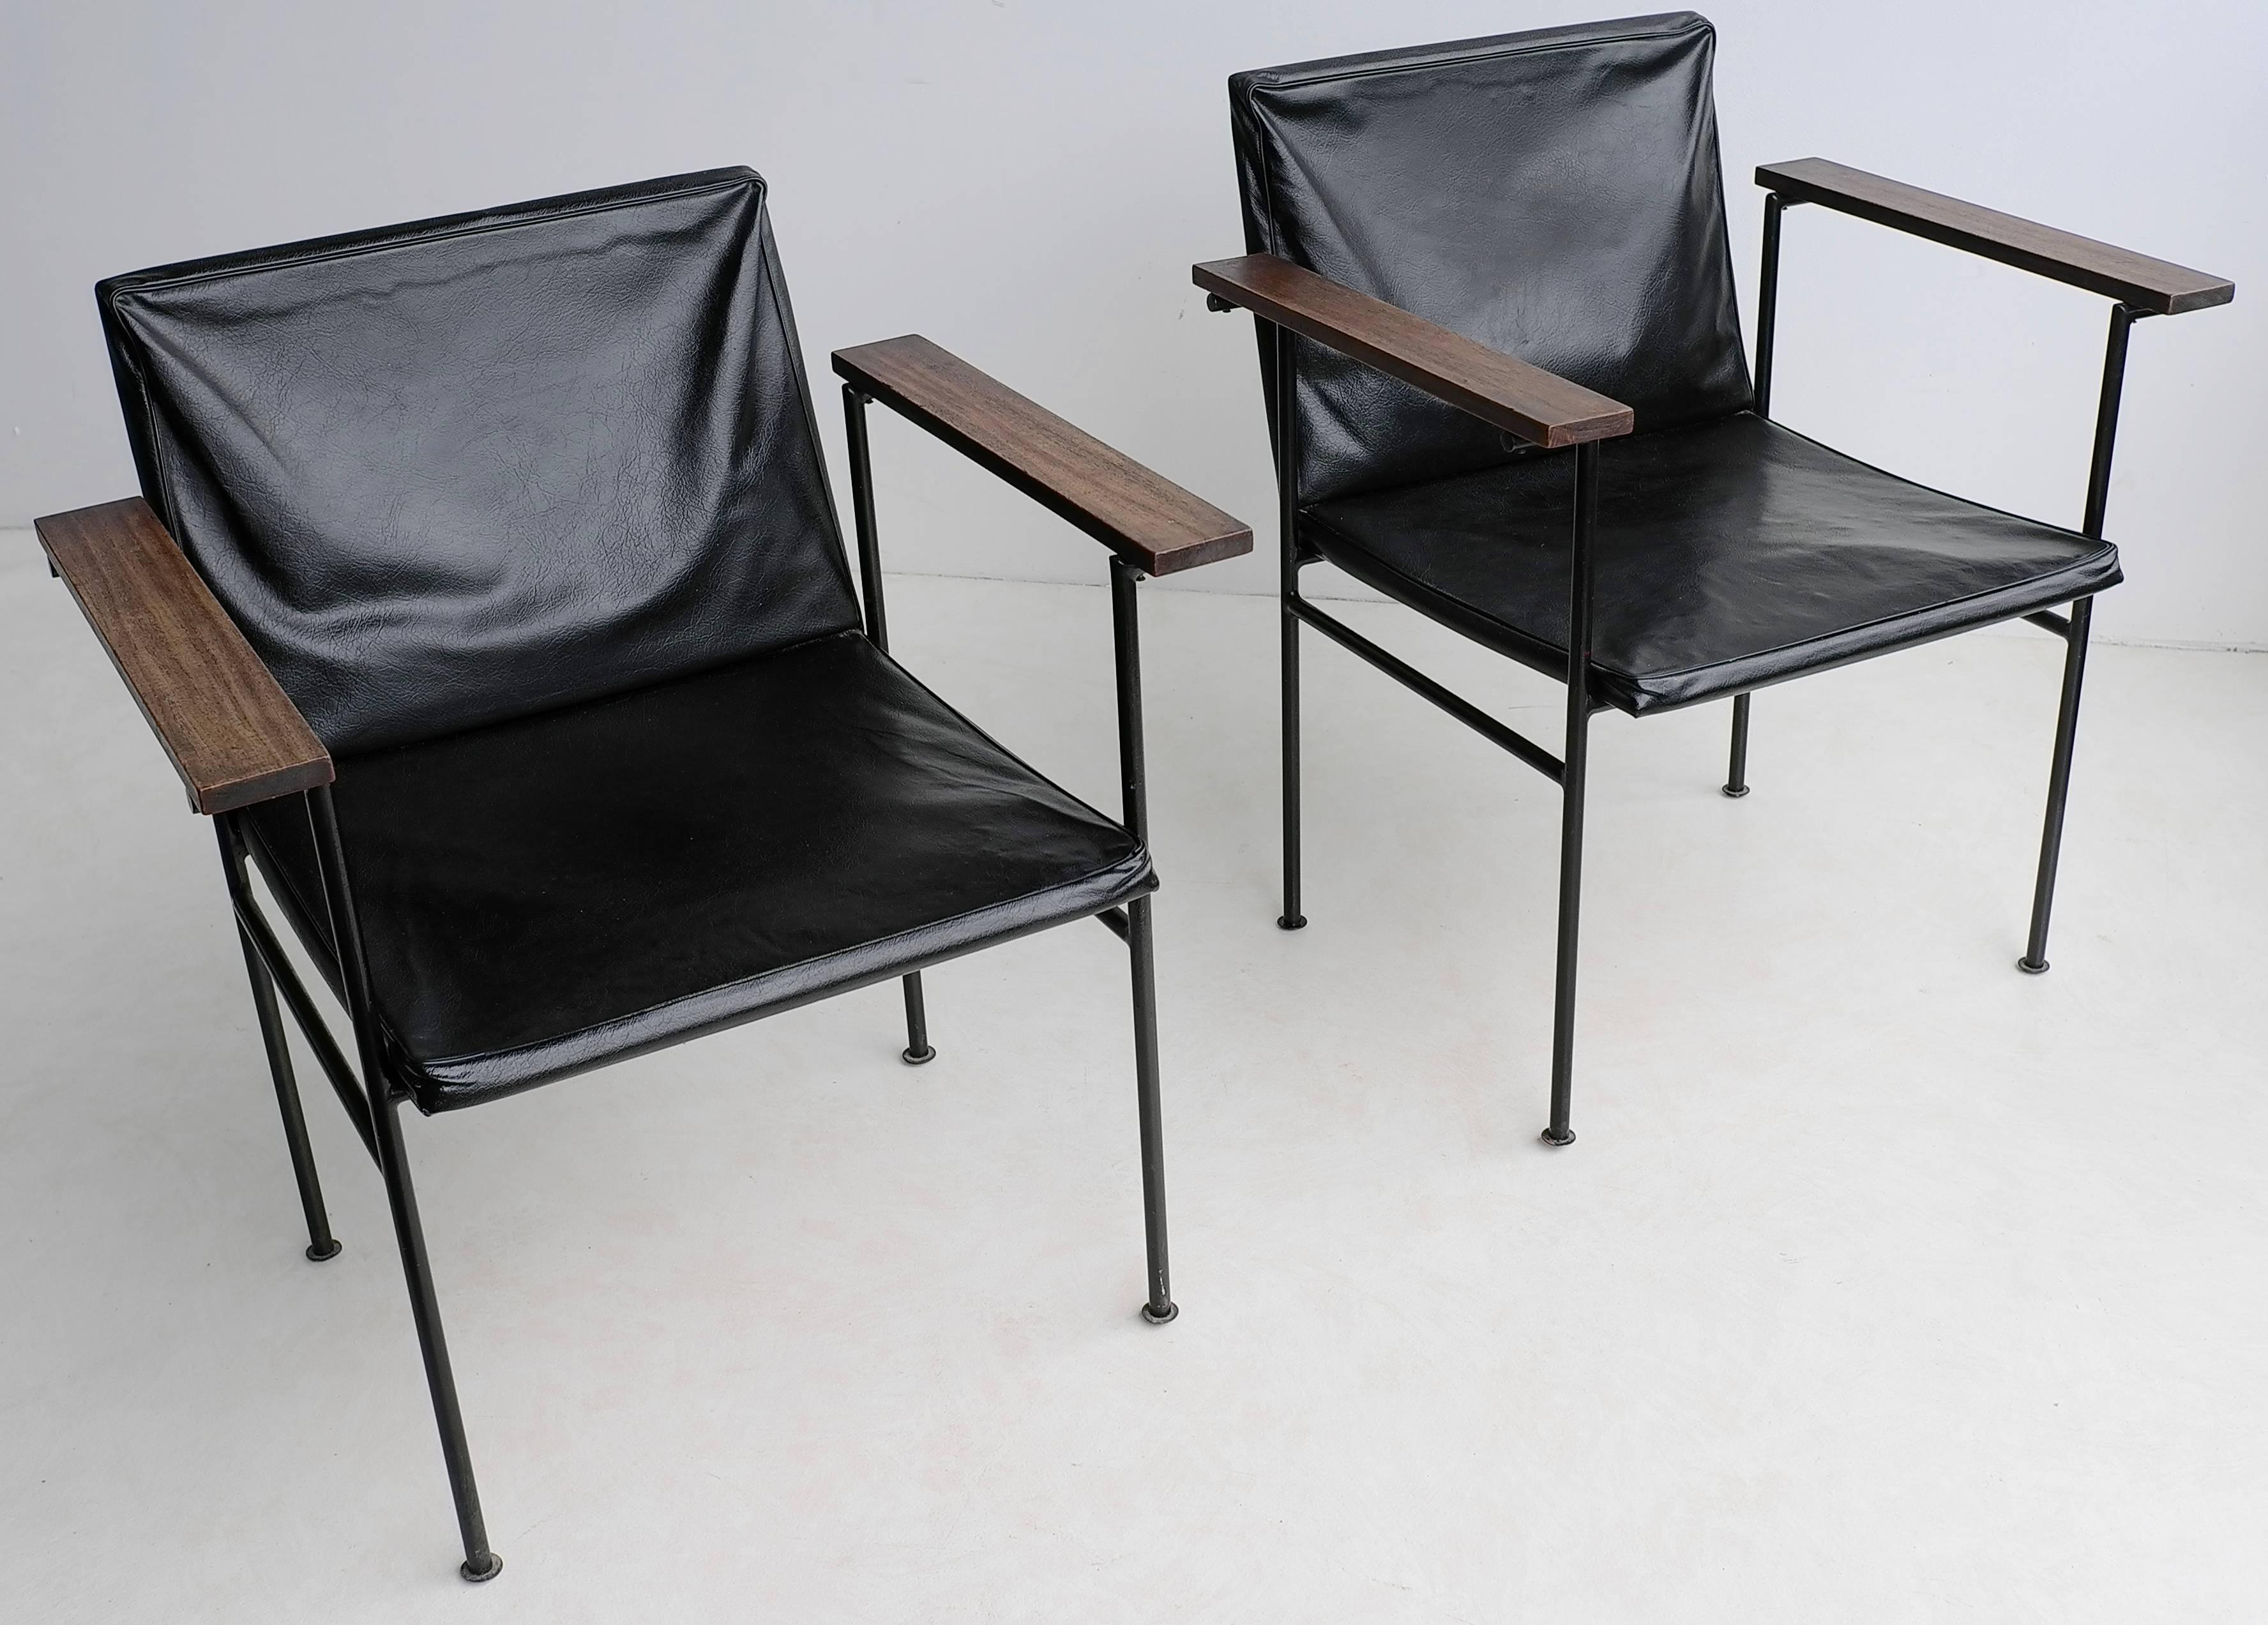 Metal Pair of Minimal Designed Side Chairs, France, 1950s For Sale